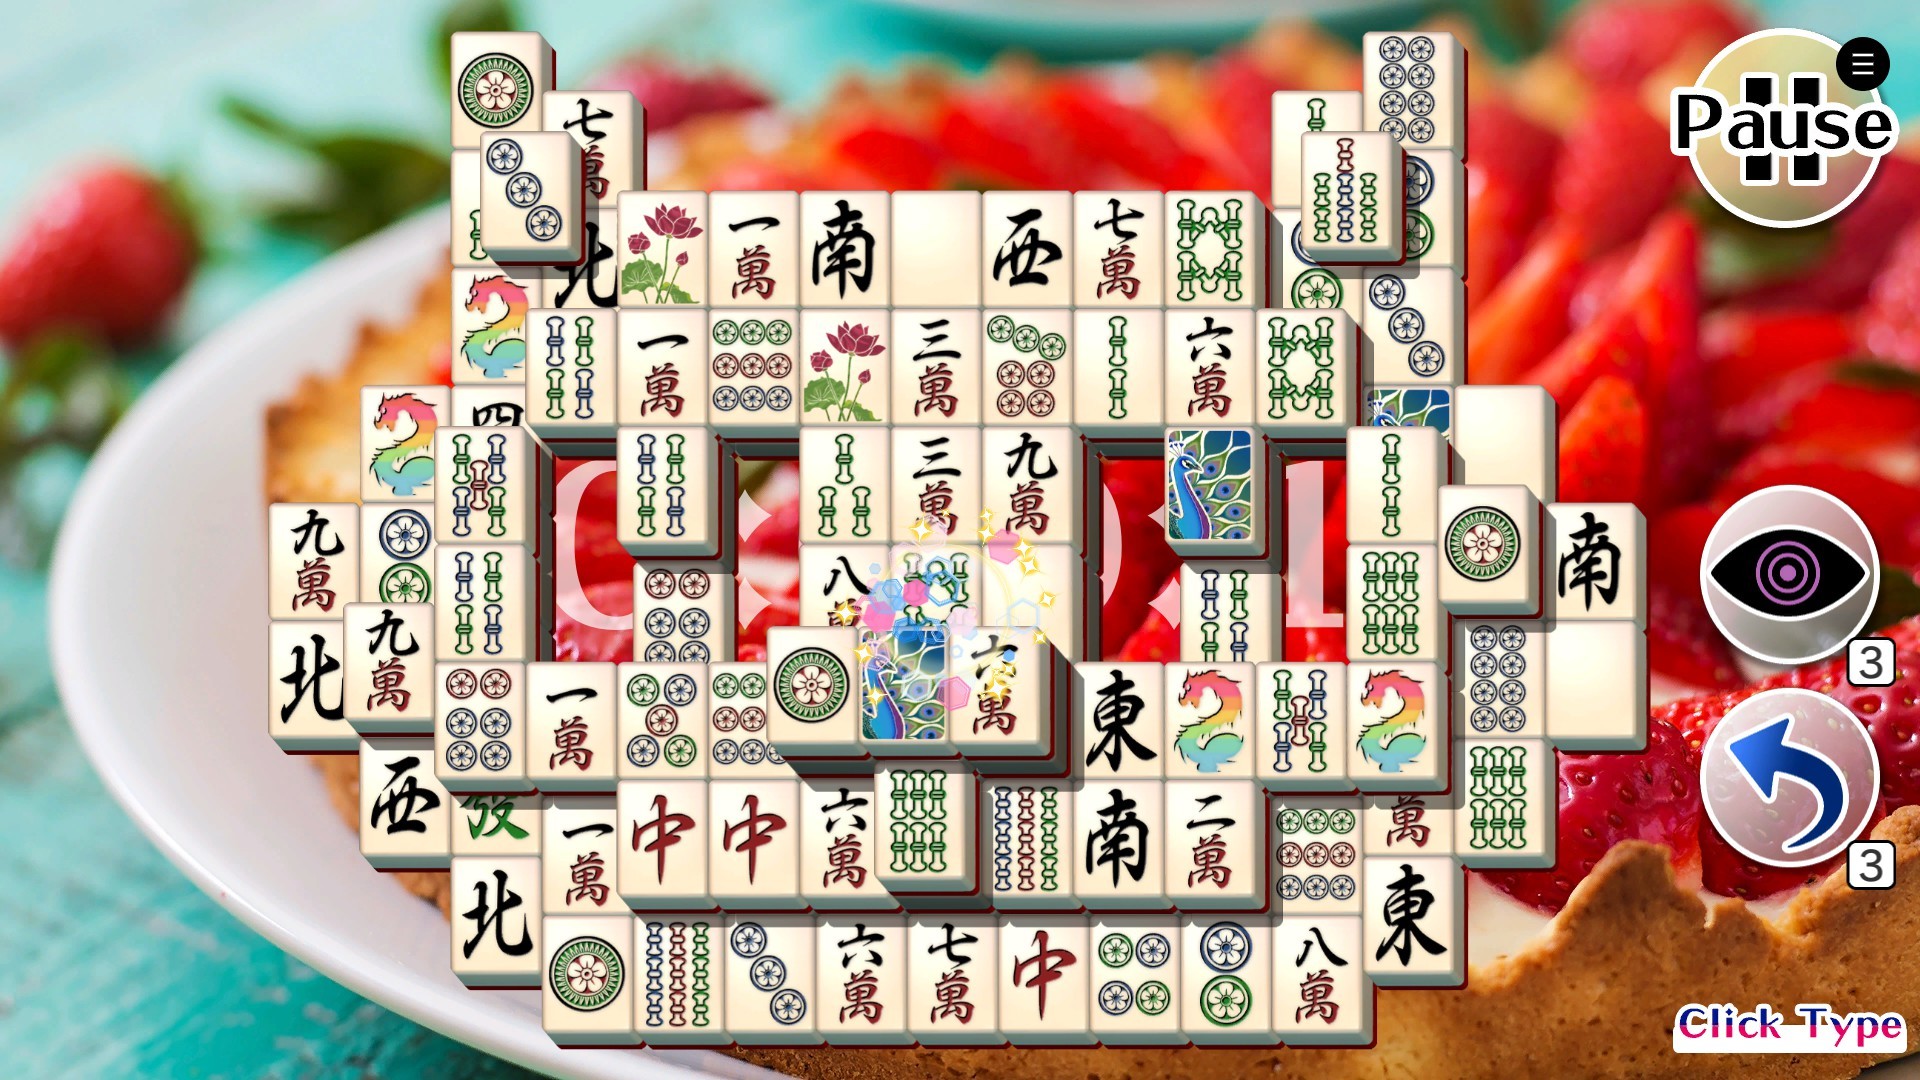 Let's make 16 games in C++: Mahjong Solitaire 